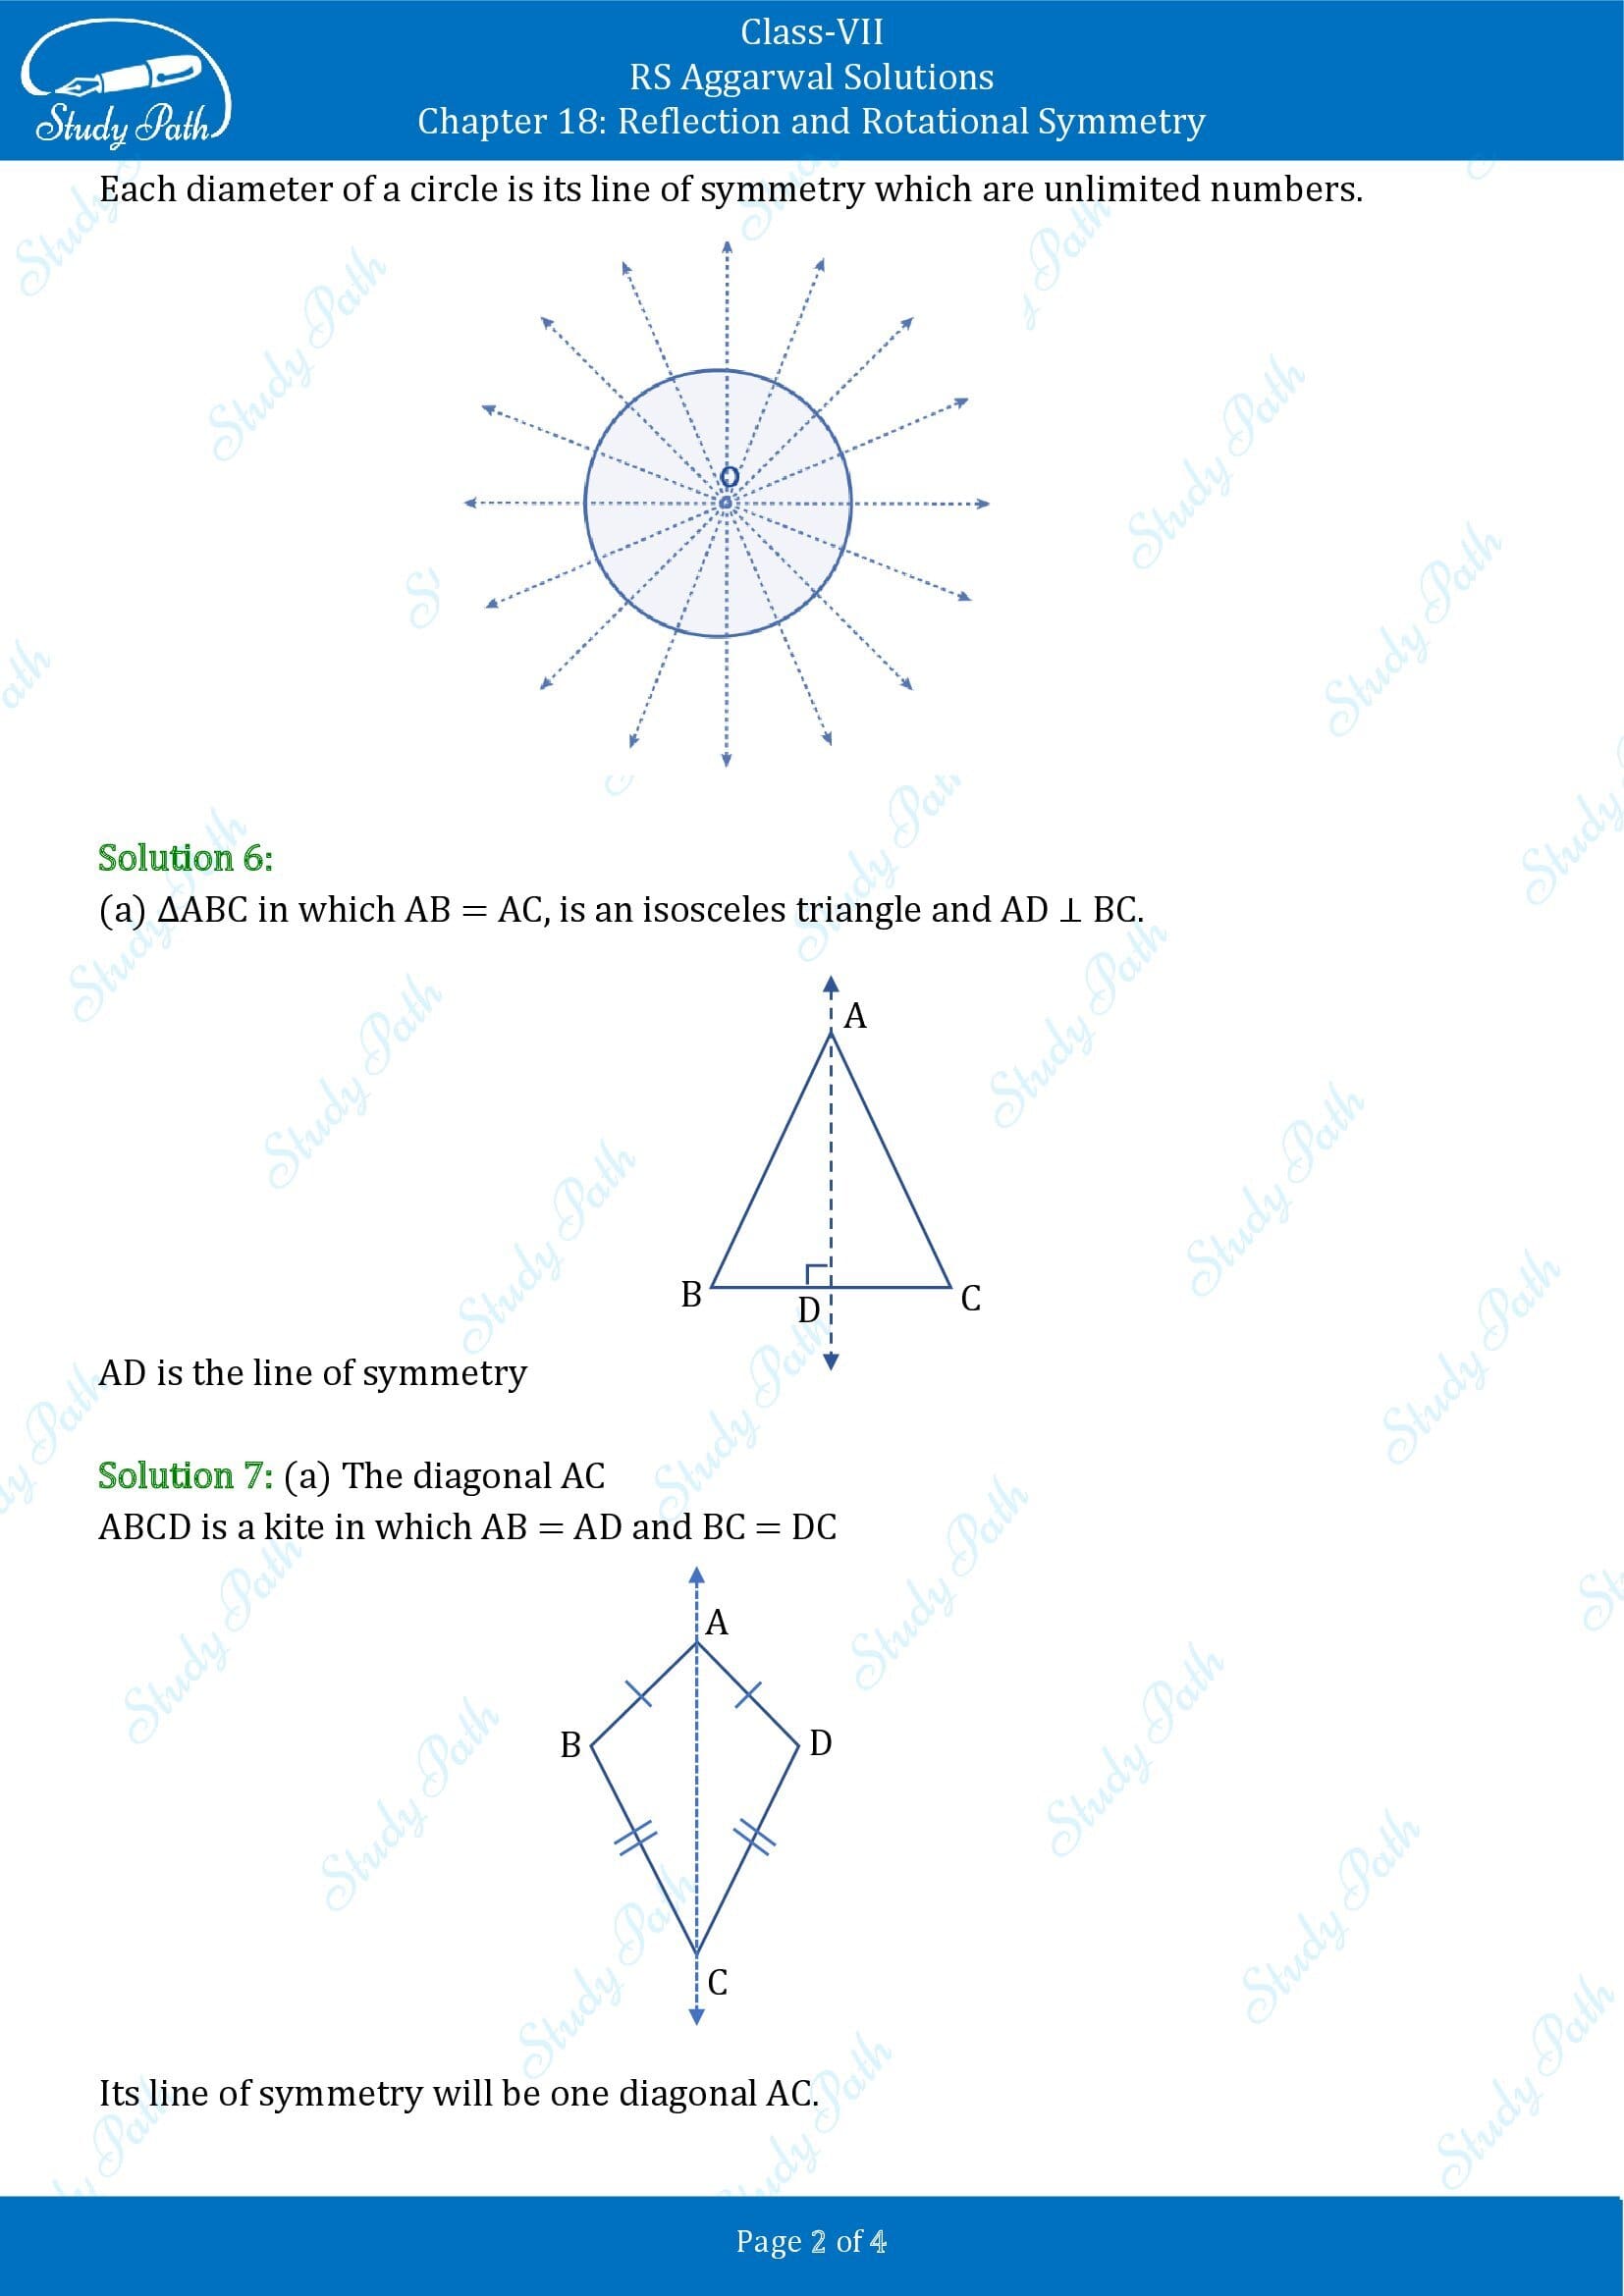 RS Aggarwal Solutions Class 7 Chapter 18 Reflection and Rotational Symmetry Exercise 18A 0002